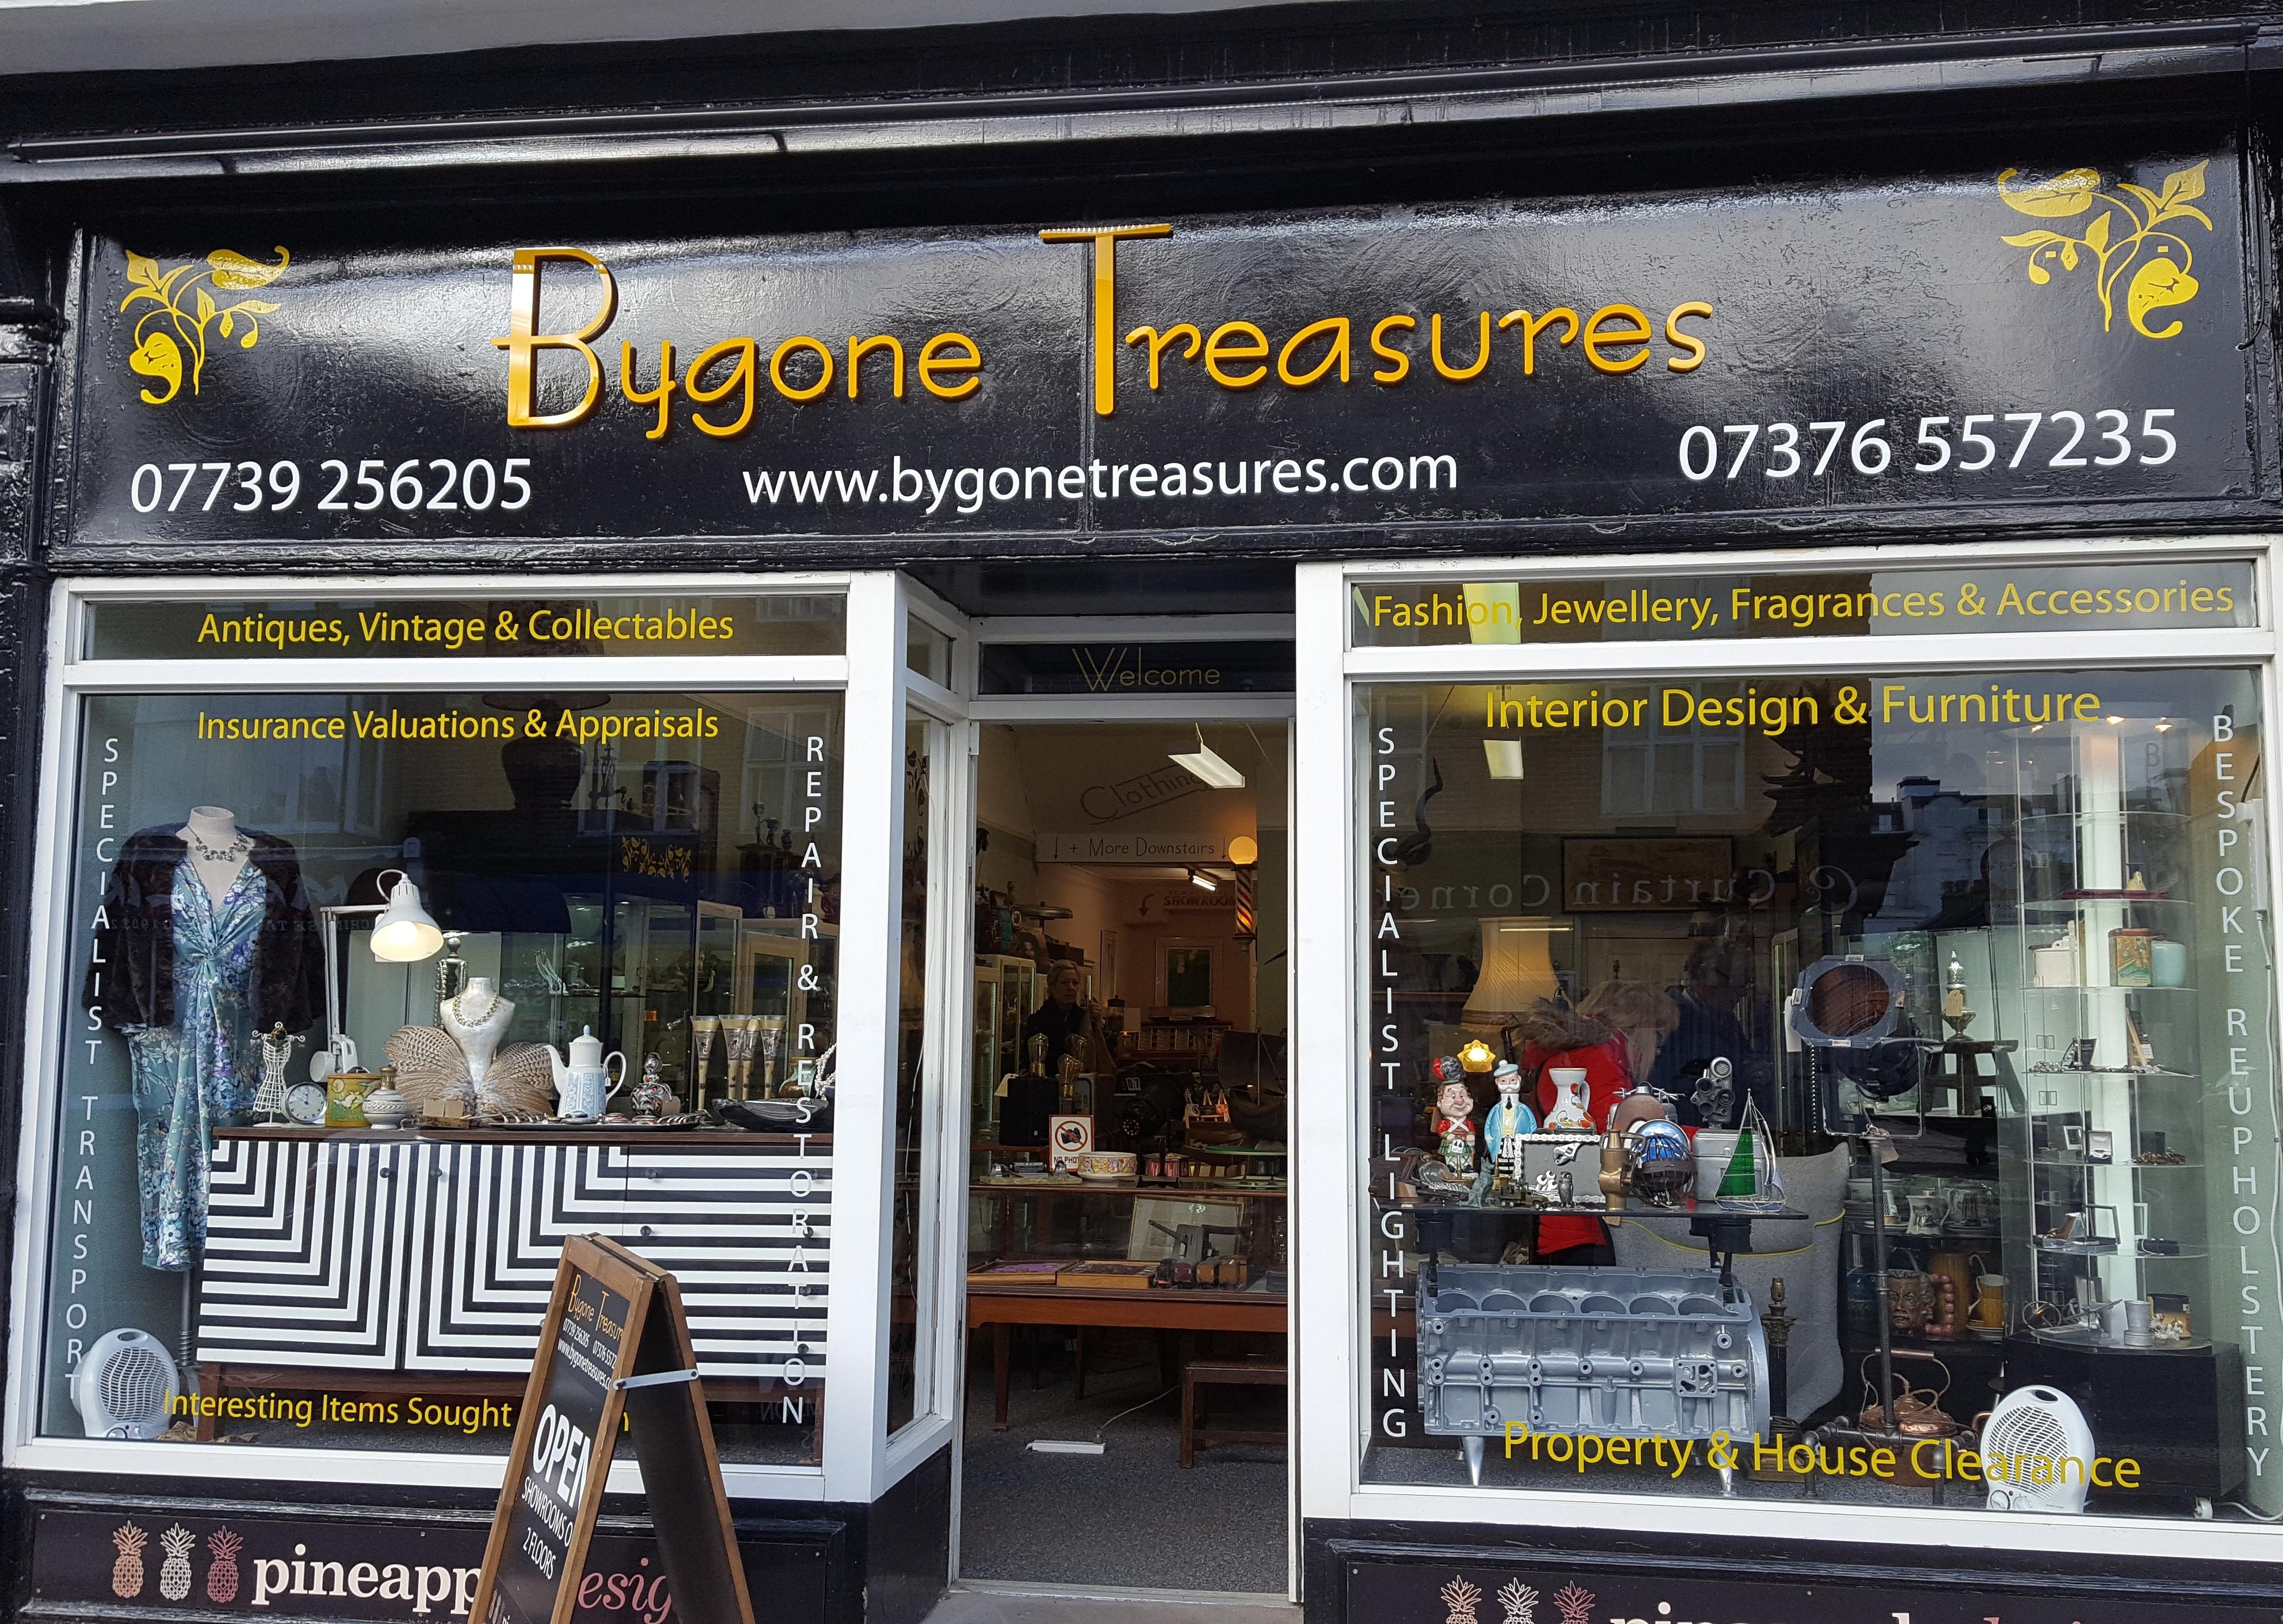 Bygone Treasures opened its Brighton Road store in January this year, selling antiques, vintage goods and collectables